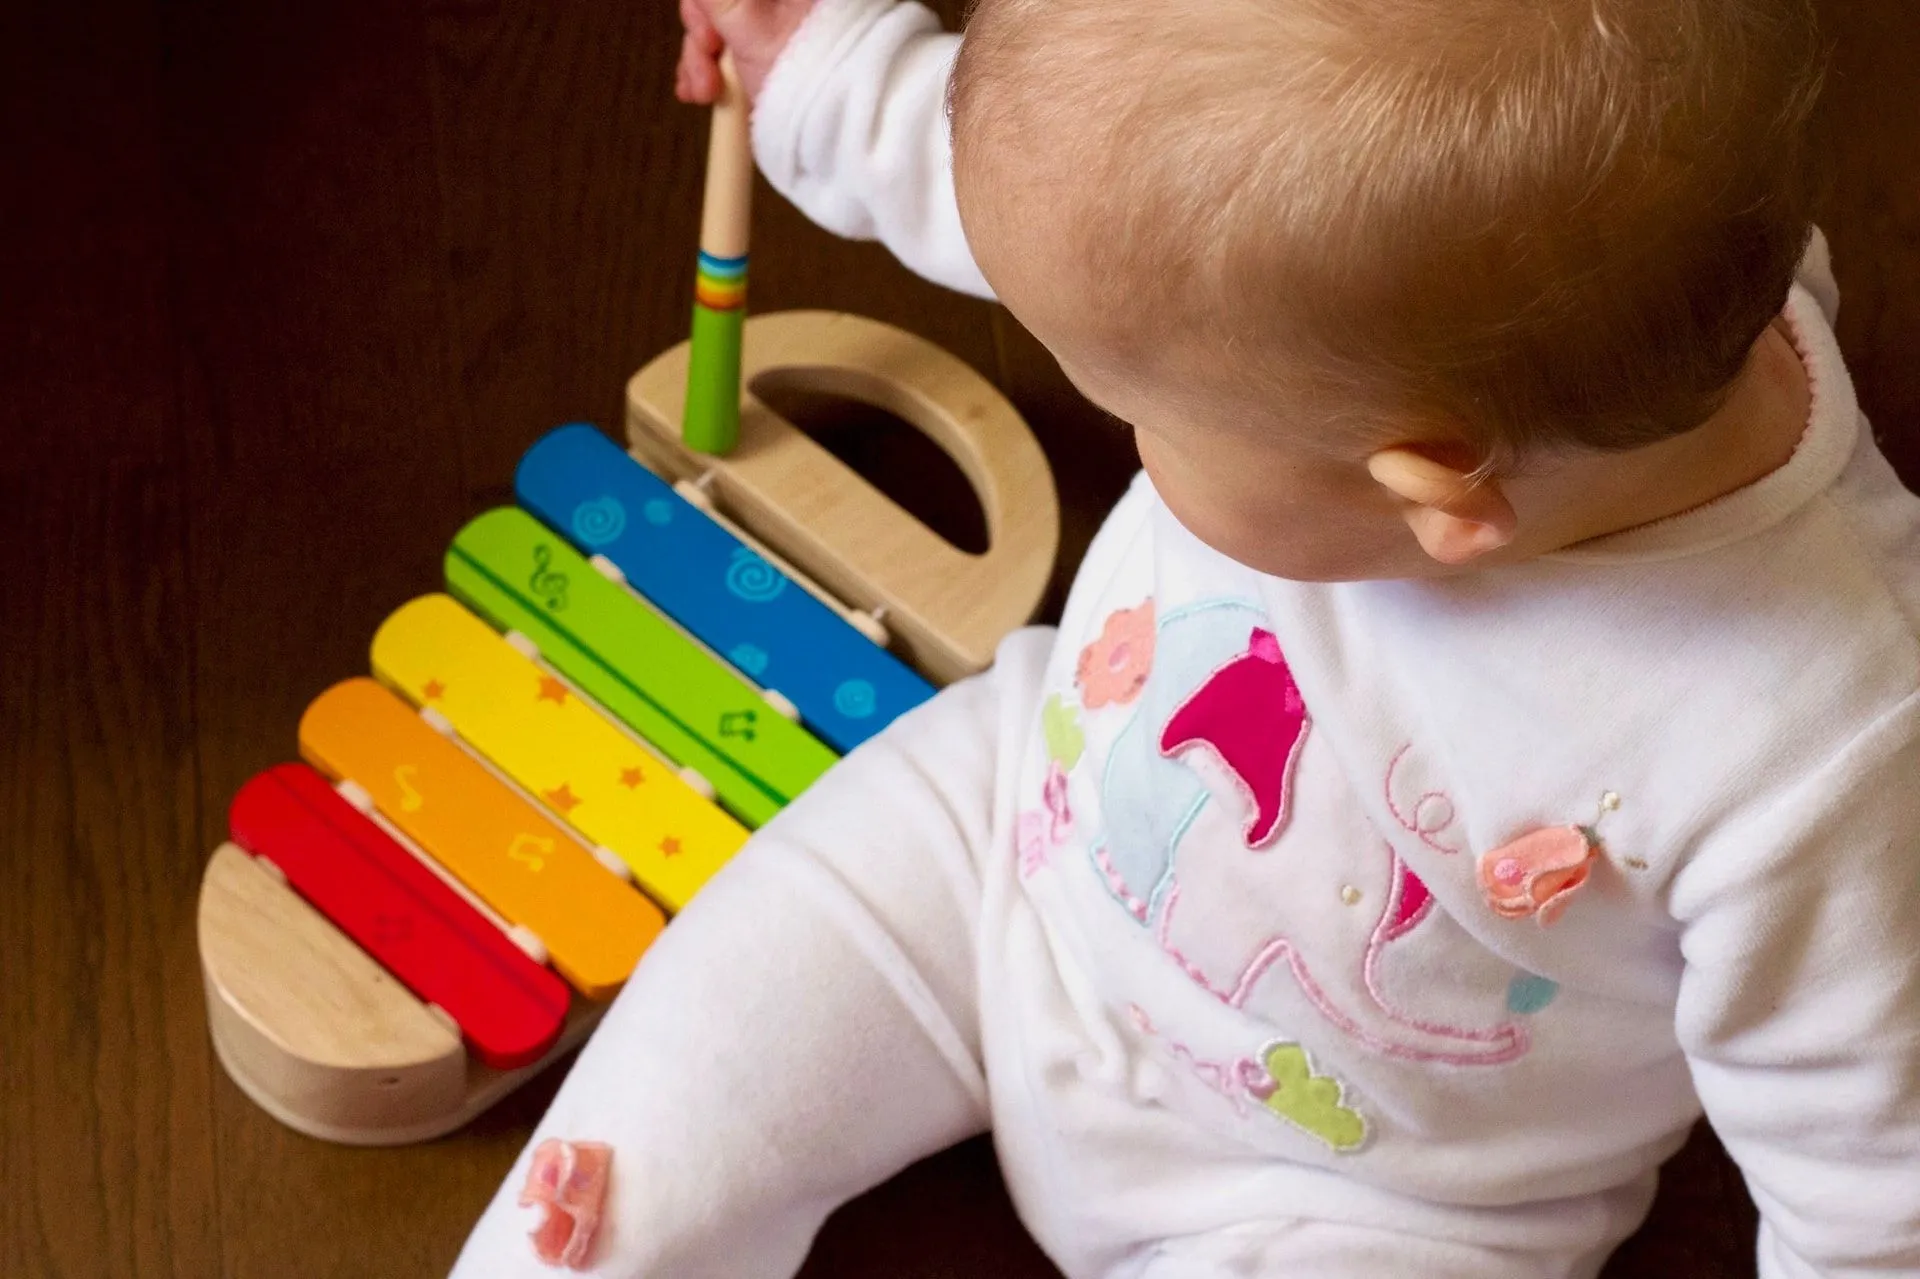 A newborn baby playing with xylophone